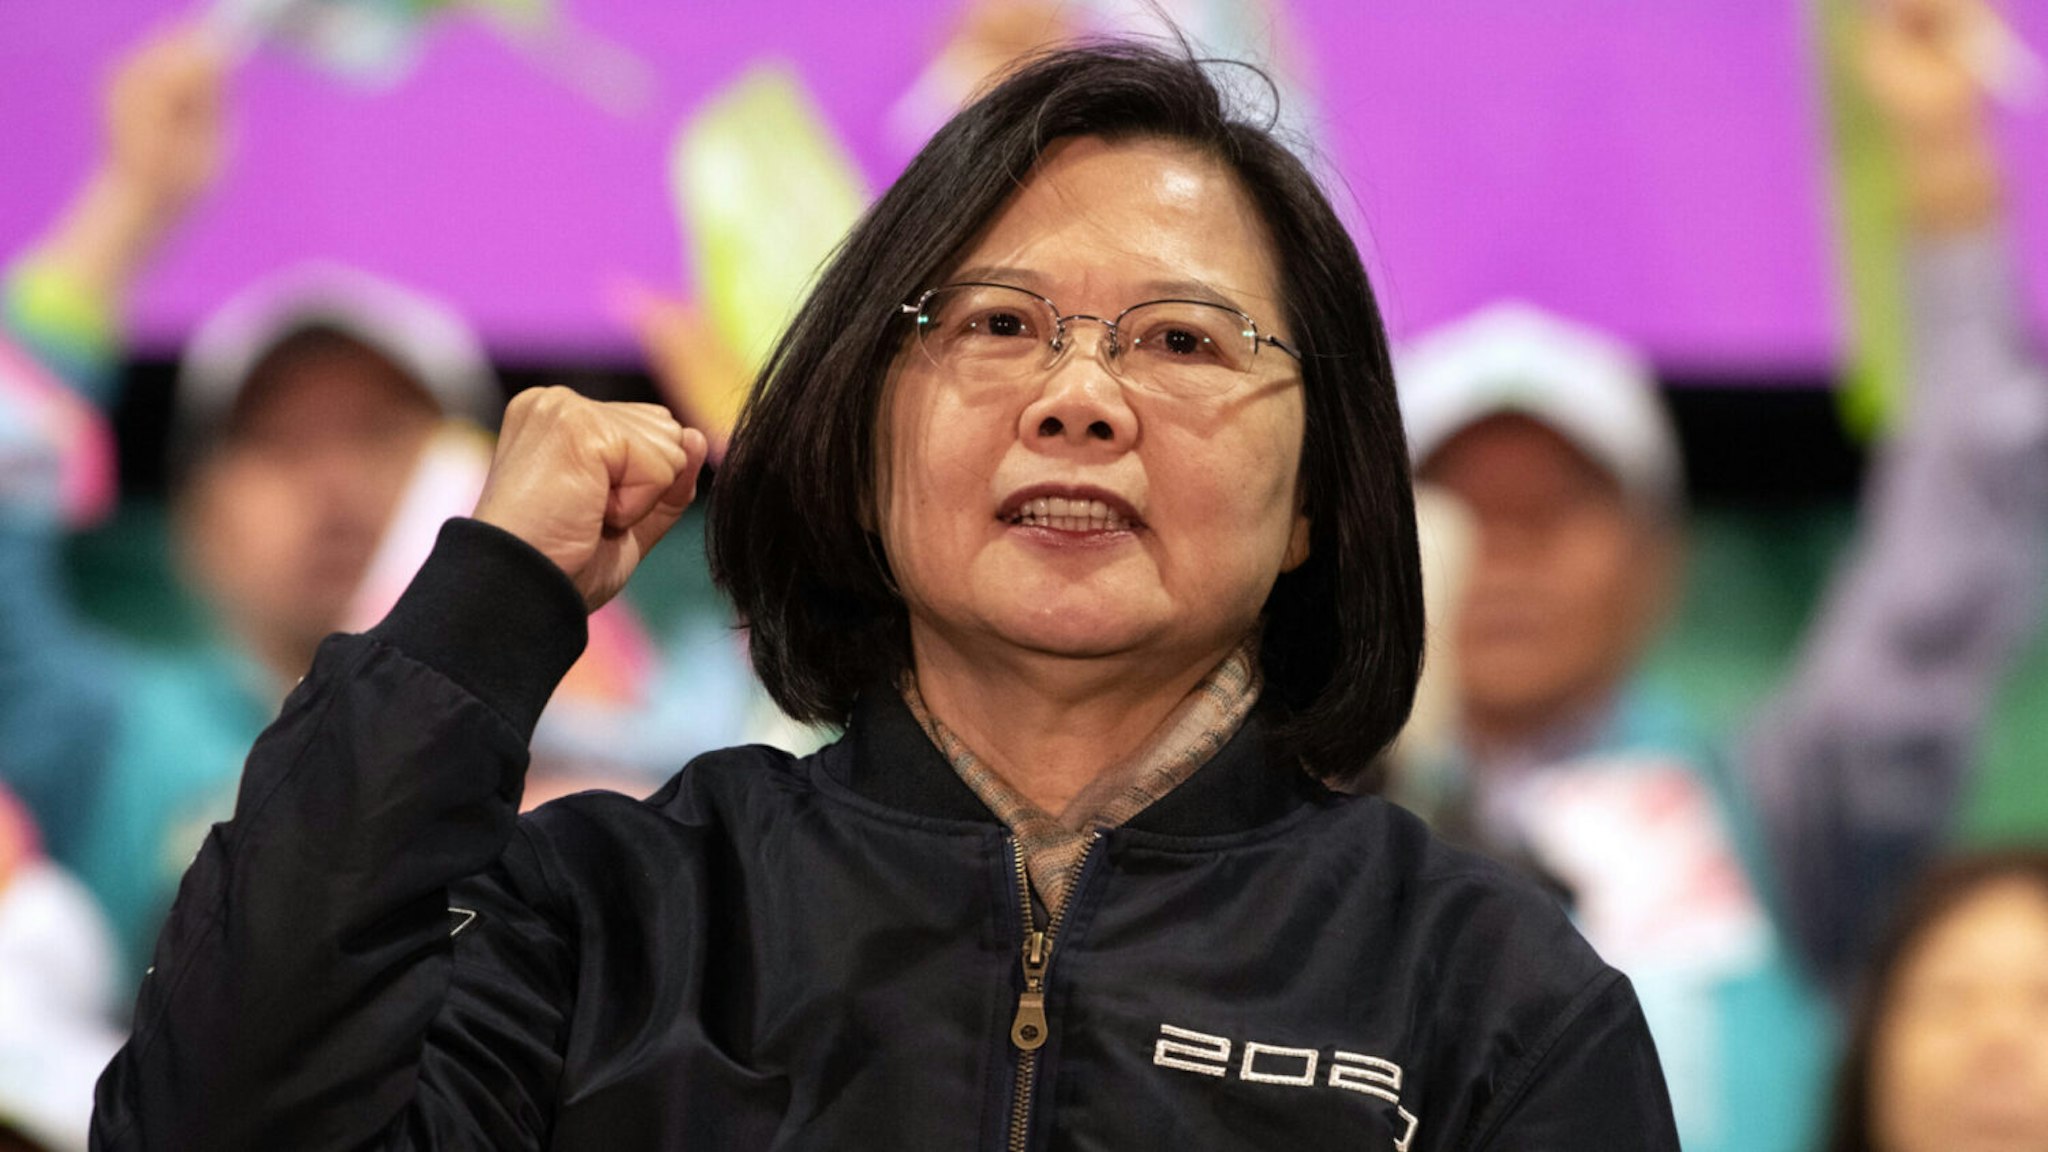 Taiwan's current president and Democratic Progressive Party presidential candidate, Tsai Ing-wen, gestures on stage during a rally ahead of Saturdays presidential election on January 8, 2020 in Taoyuan, Taiwan.